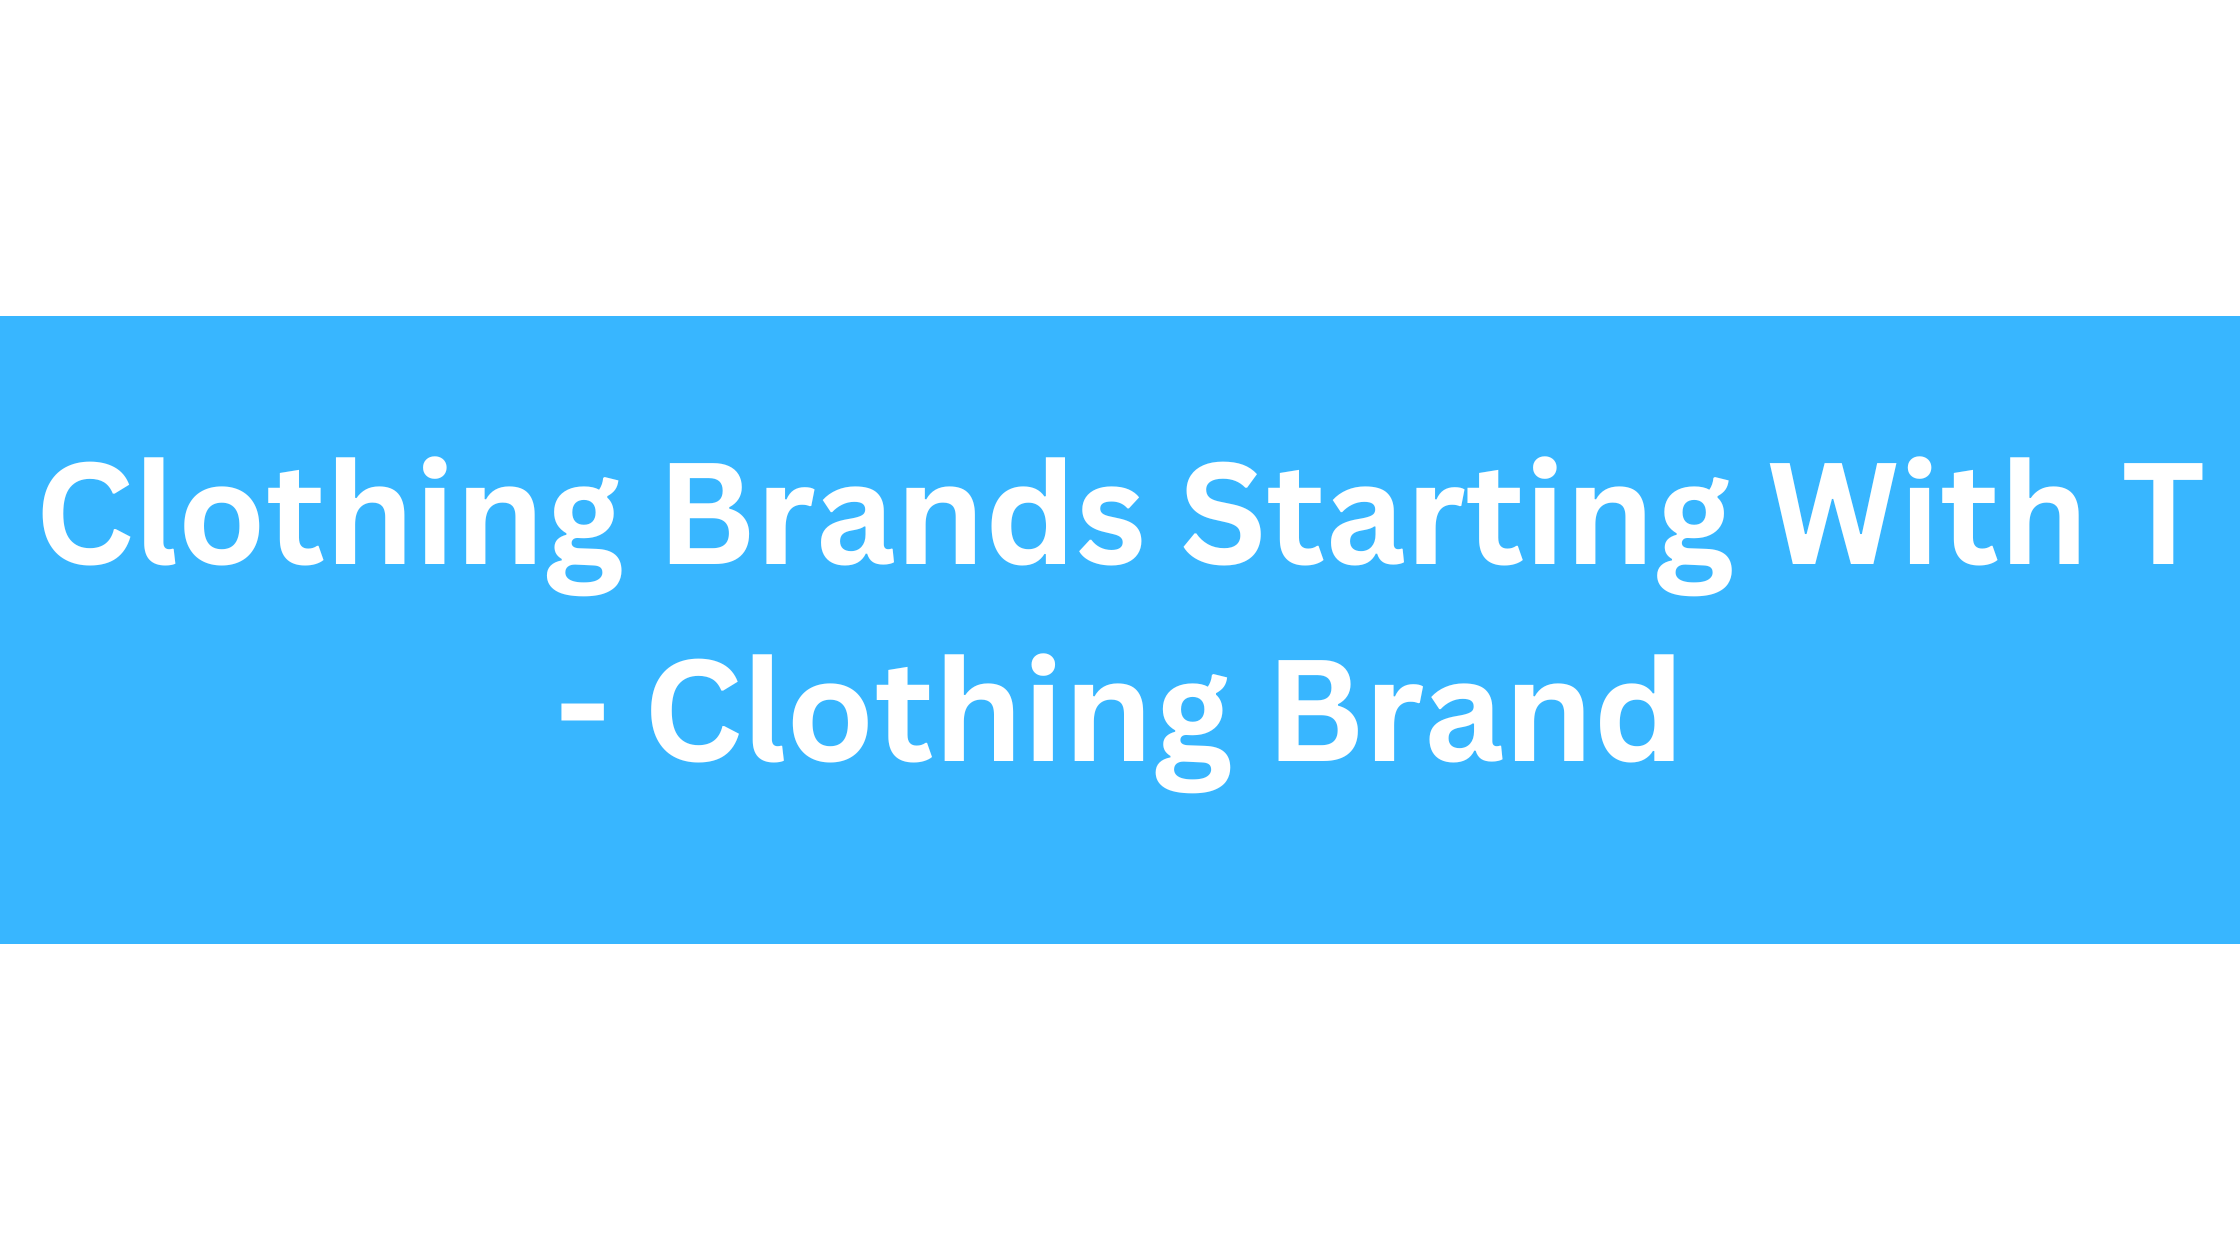 Clothing Brands Starting With T